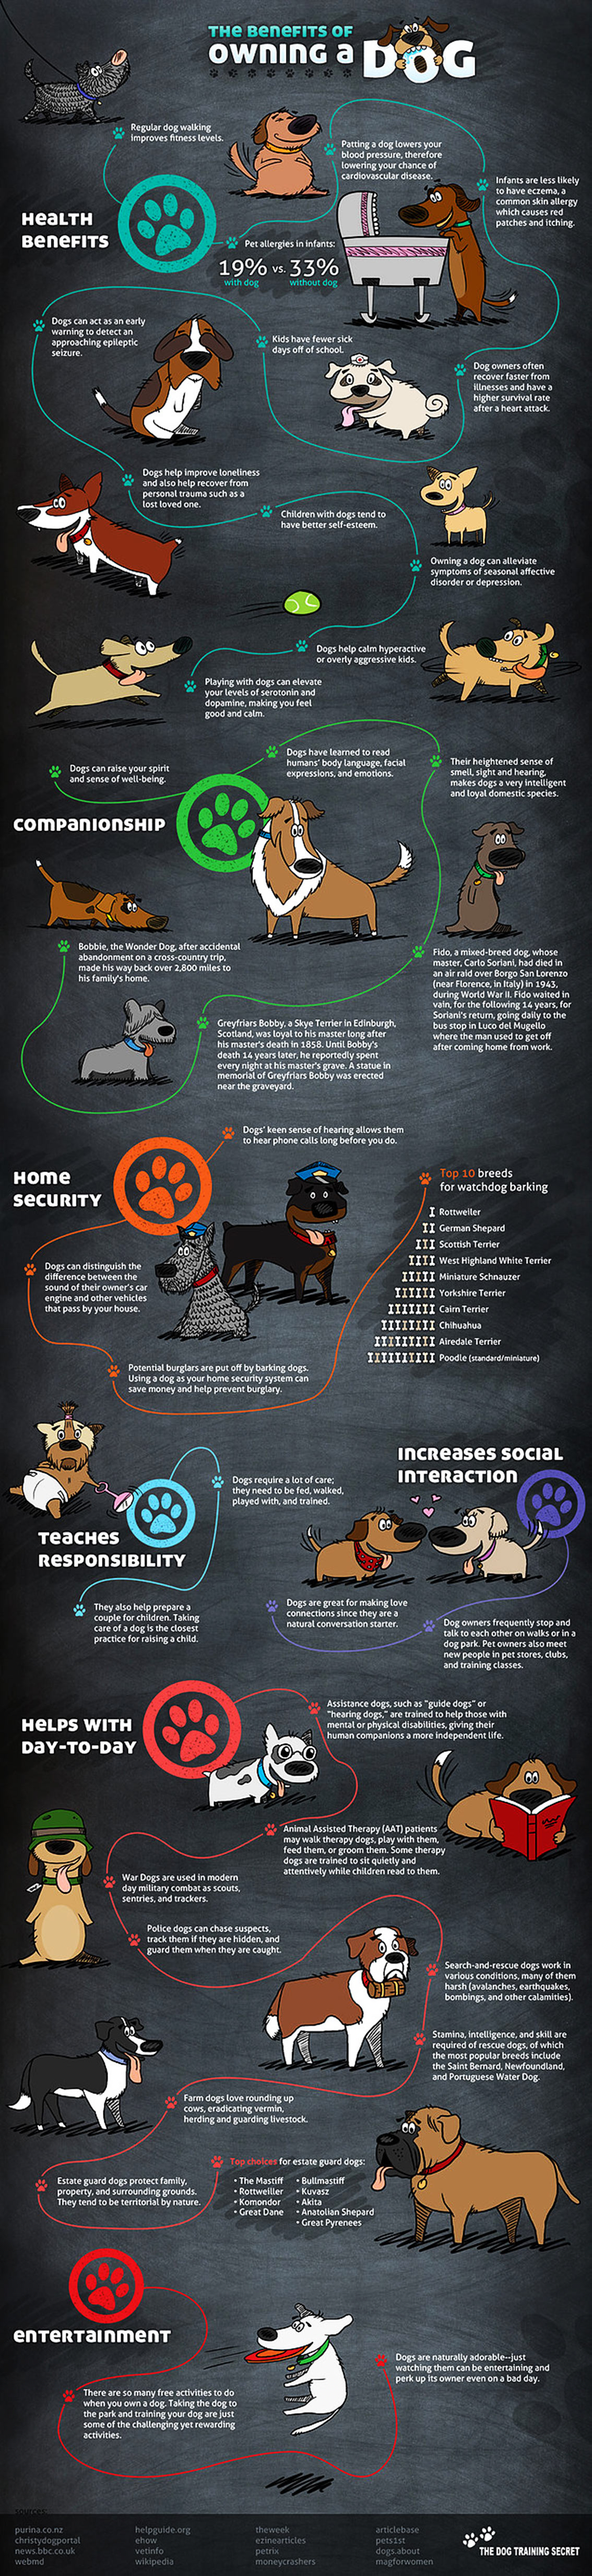 38 Reasons for Owning a Dog - Pet infographic